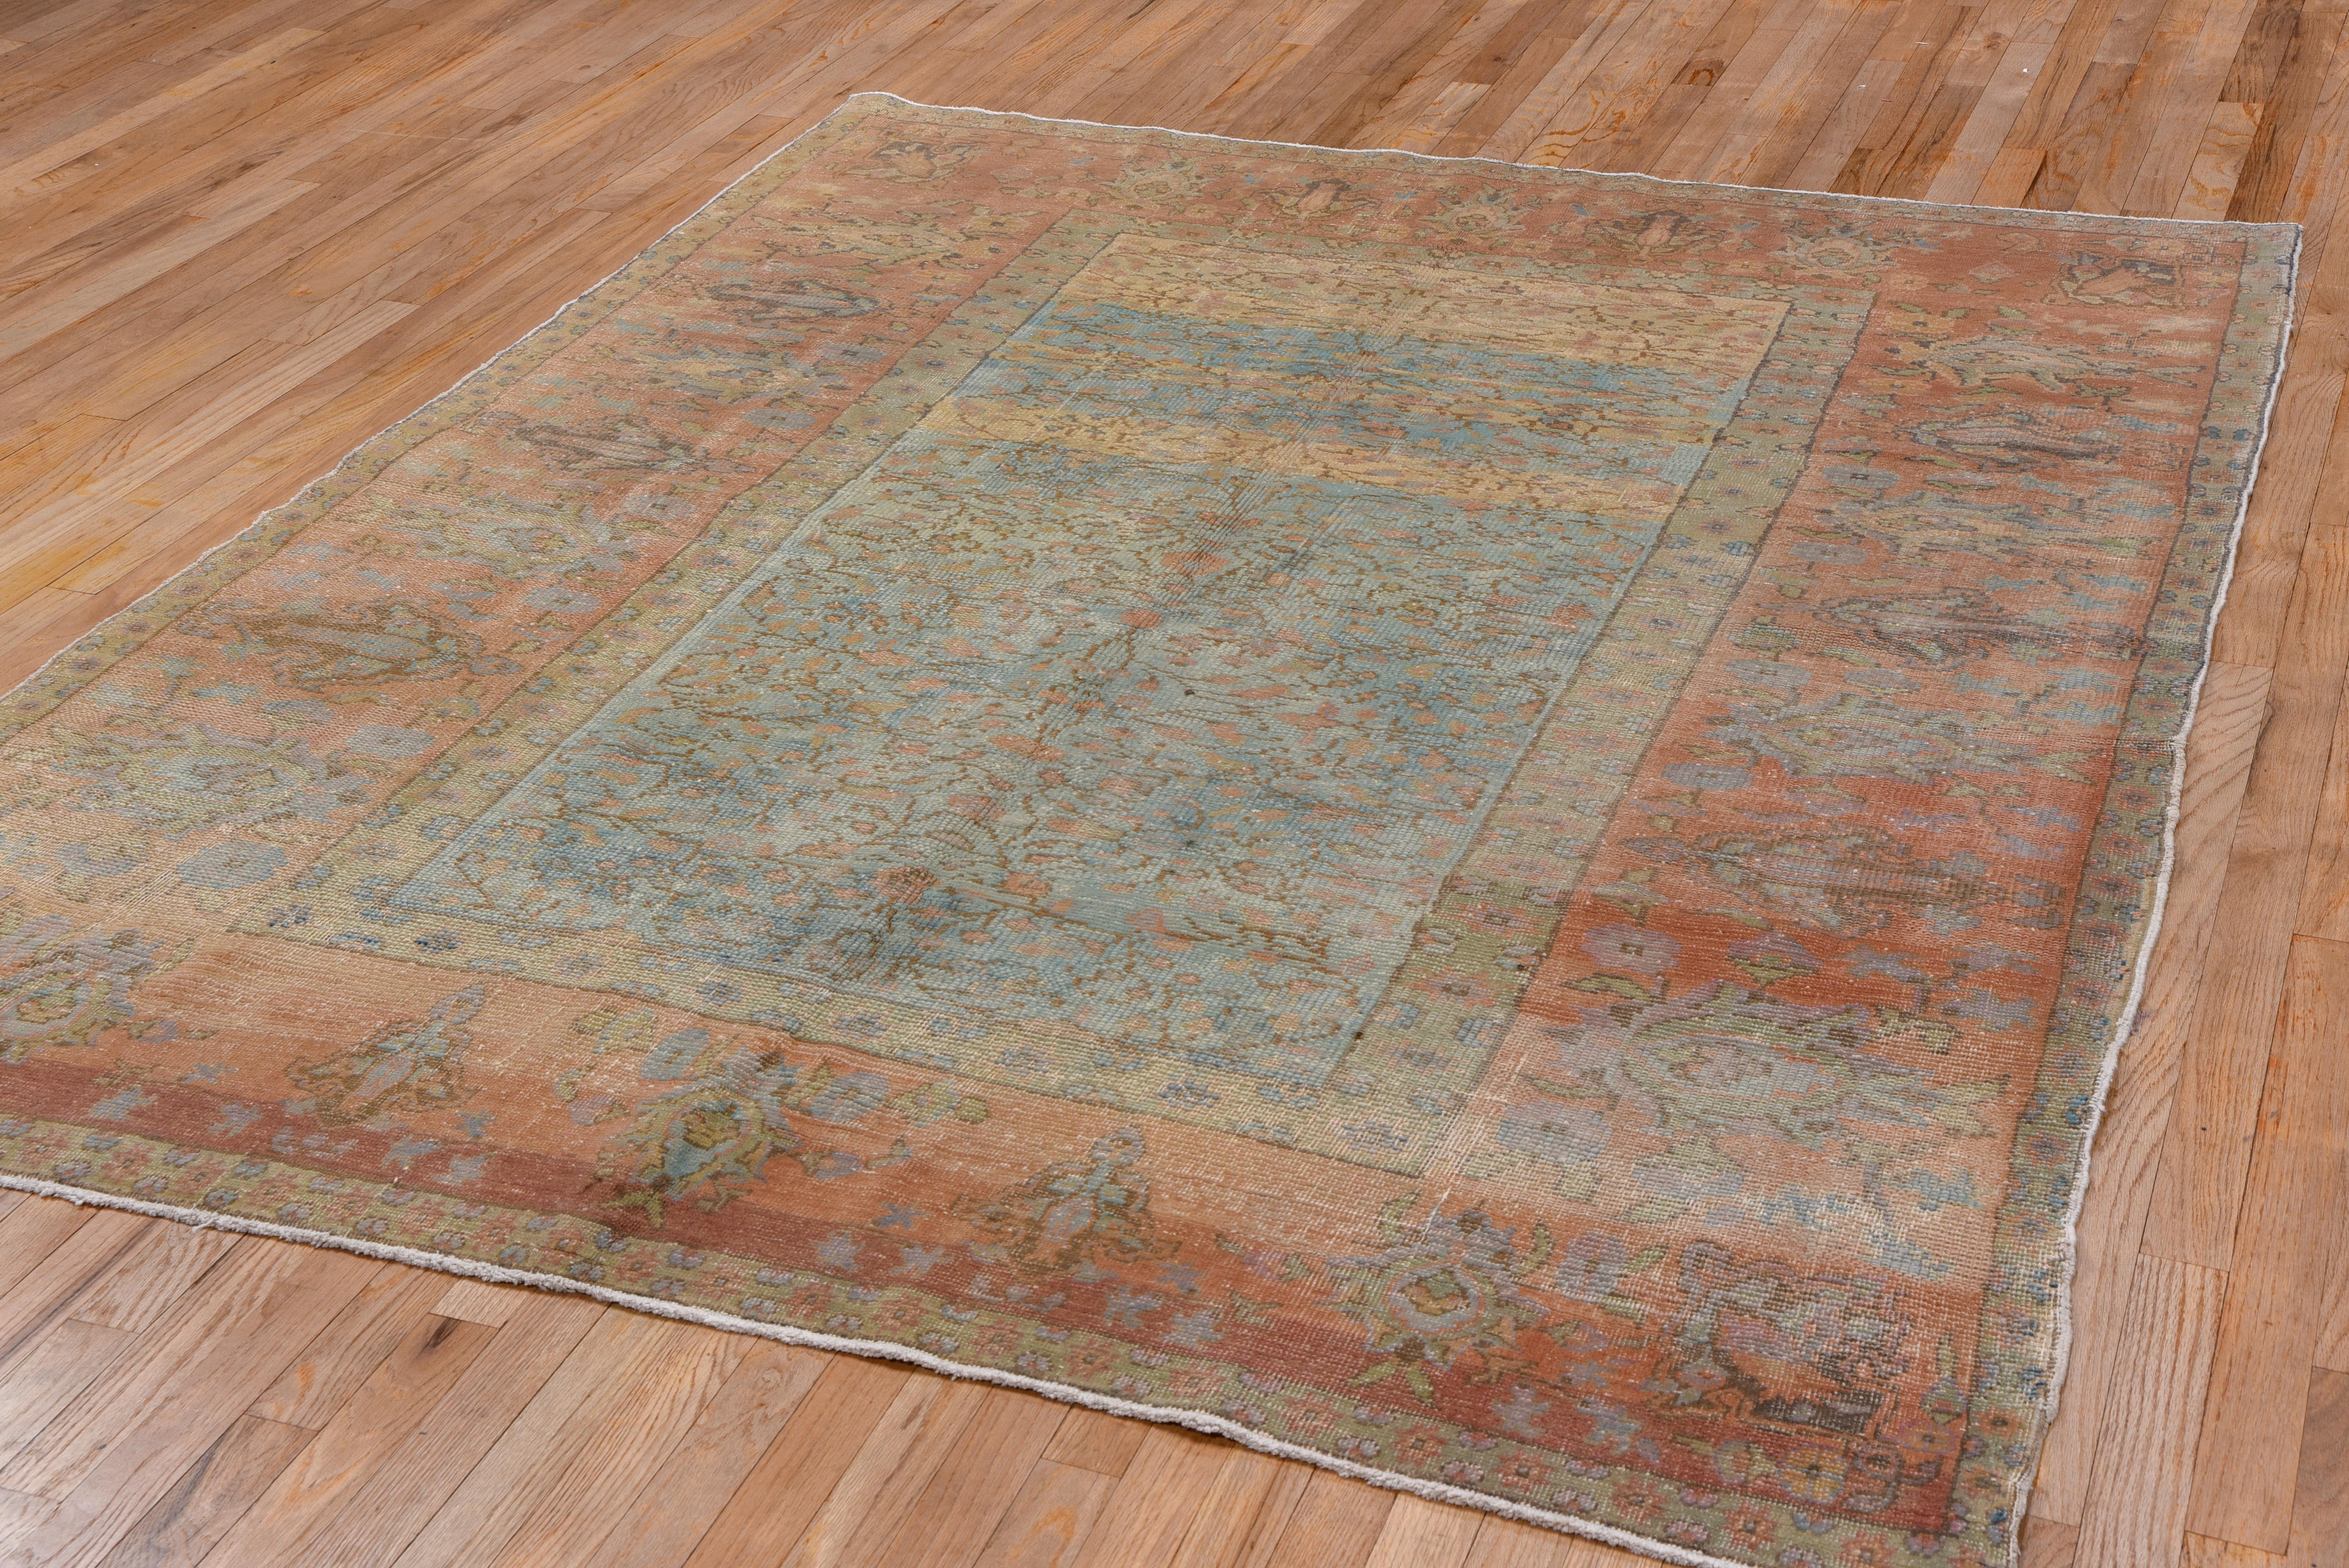 Sandy field with a wiry brown vinery pattern, set within a coral border of various palmettes with a generally subdued palette. Gorgeous pastel colors on this Oushak rug.